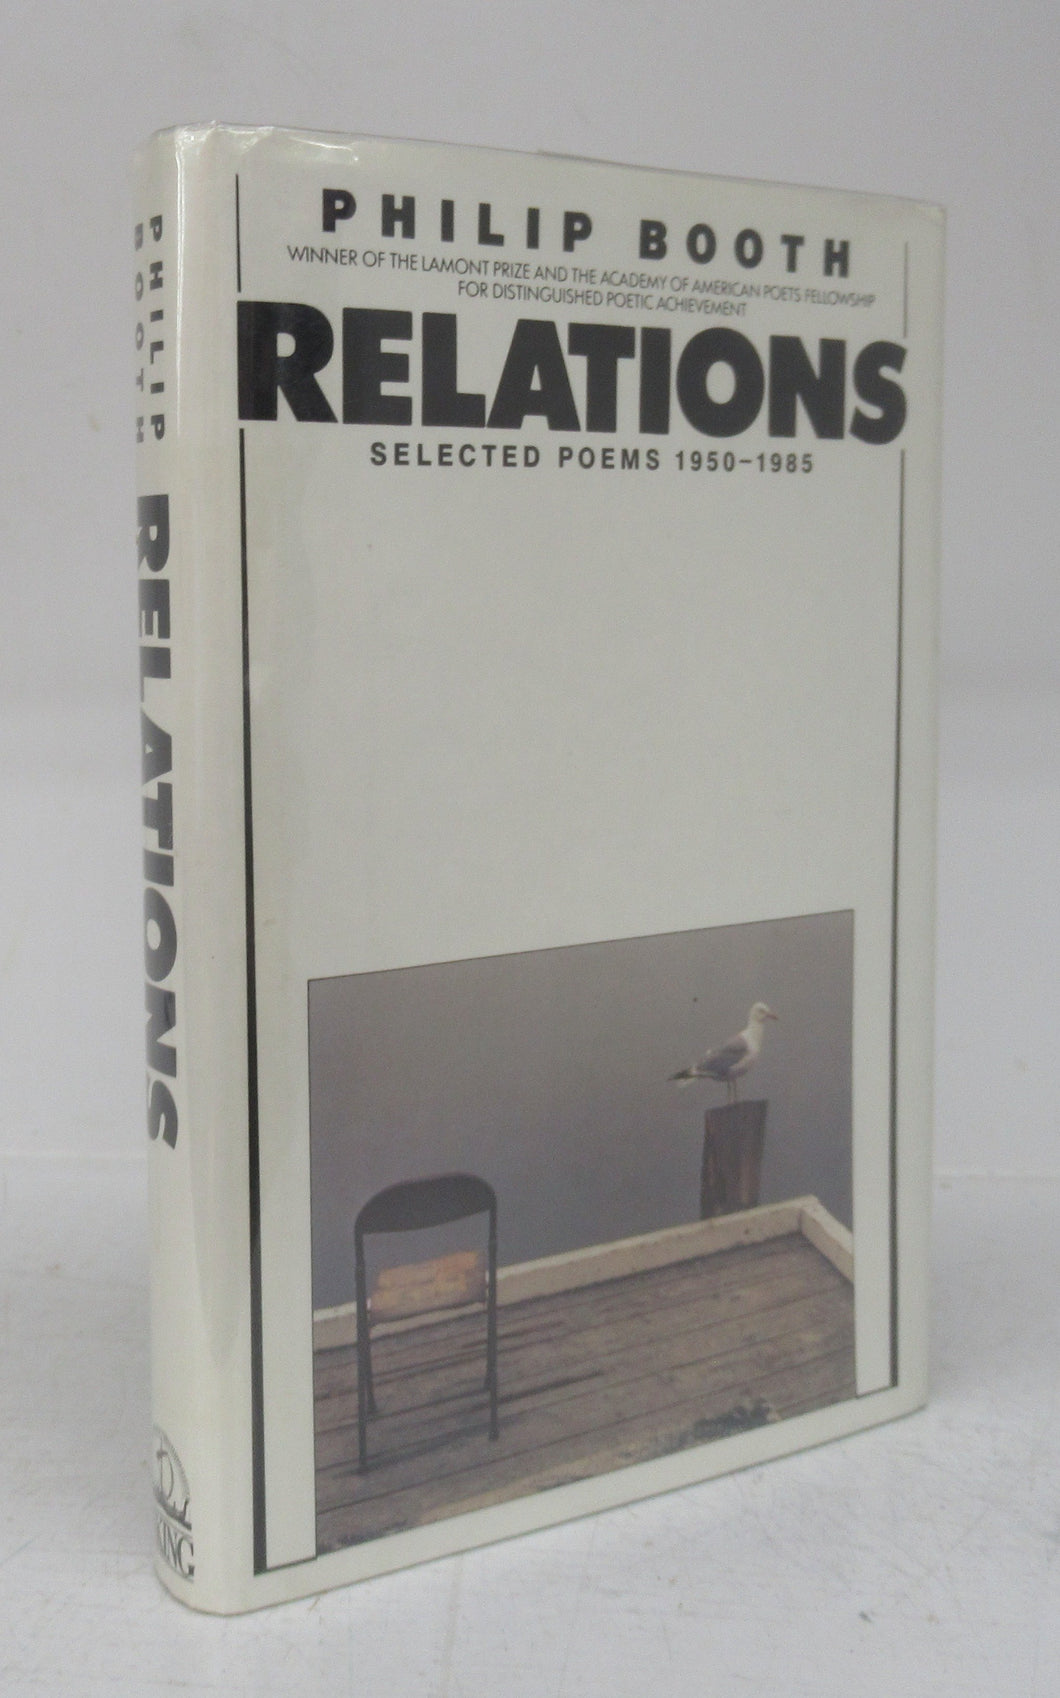 Relations: Selected Poems 1950-1985